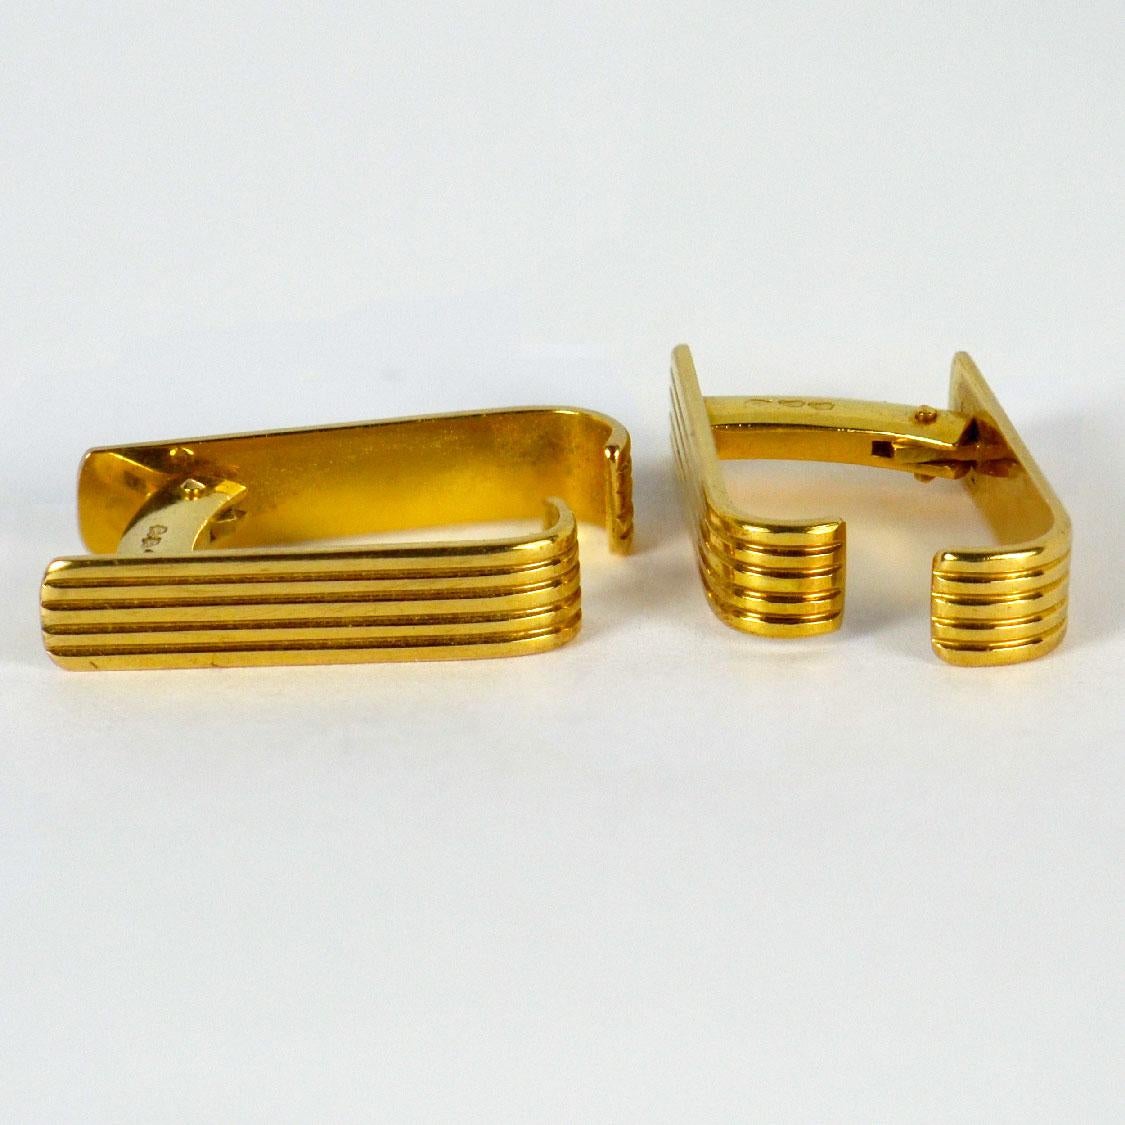 A smart pair of French 18 Karat yellow gold stirrup cufflinks with ridged detail. Stamped with the eagles head for 18 karat gold and French manufacture with an unknown makers mark.

Dimensions: 2.3 x 1.6 x 0.5 cm
Weight: 9.11 grams
